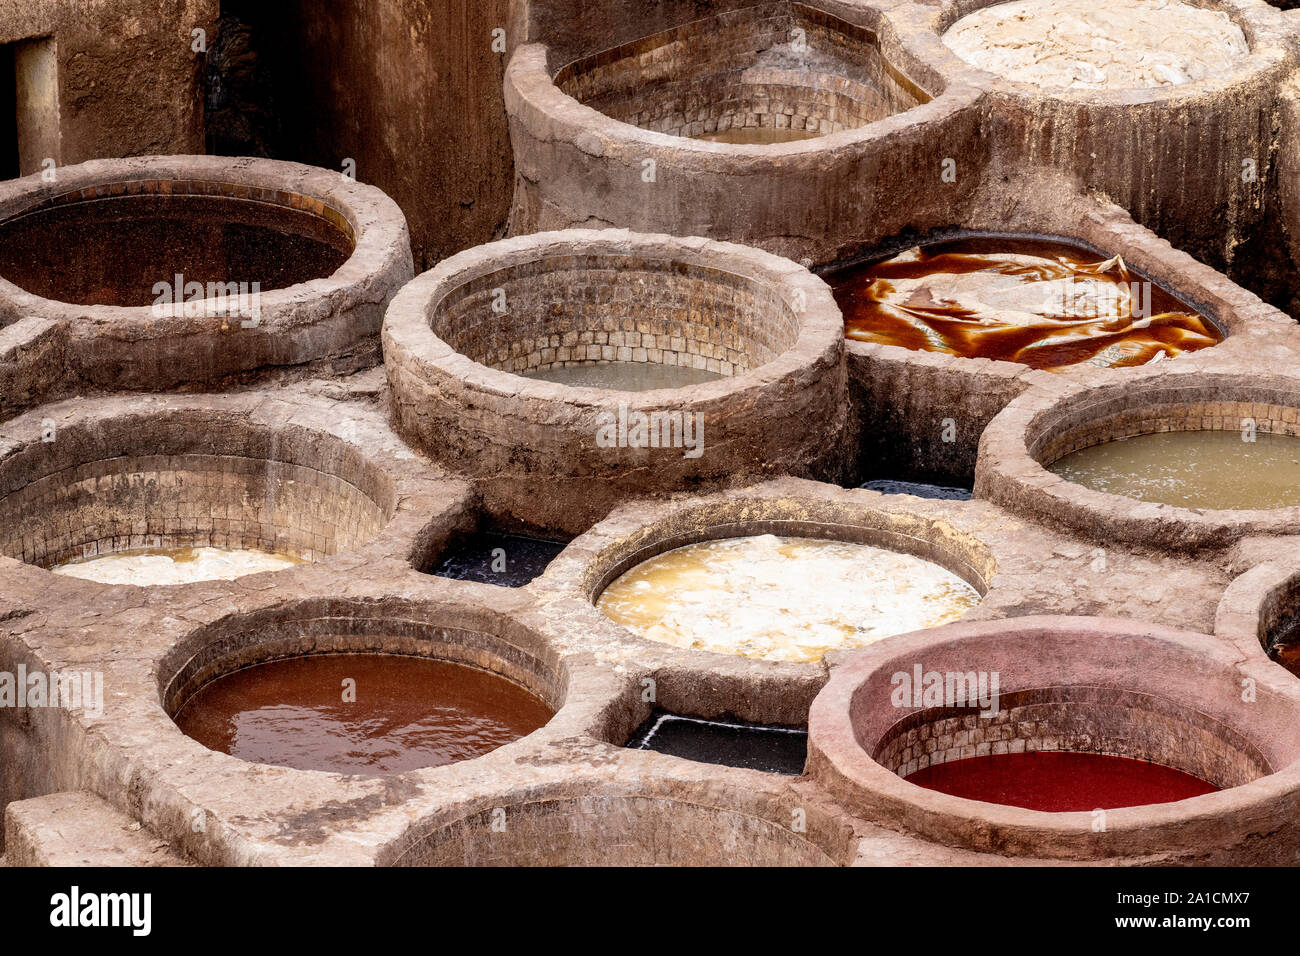 Vats filled with various dyes at a tannery in Fes, Morocco which will be used to dye the hides various tones Stock Photo